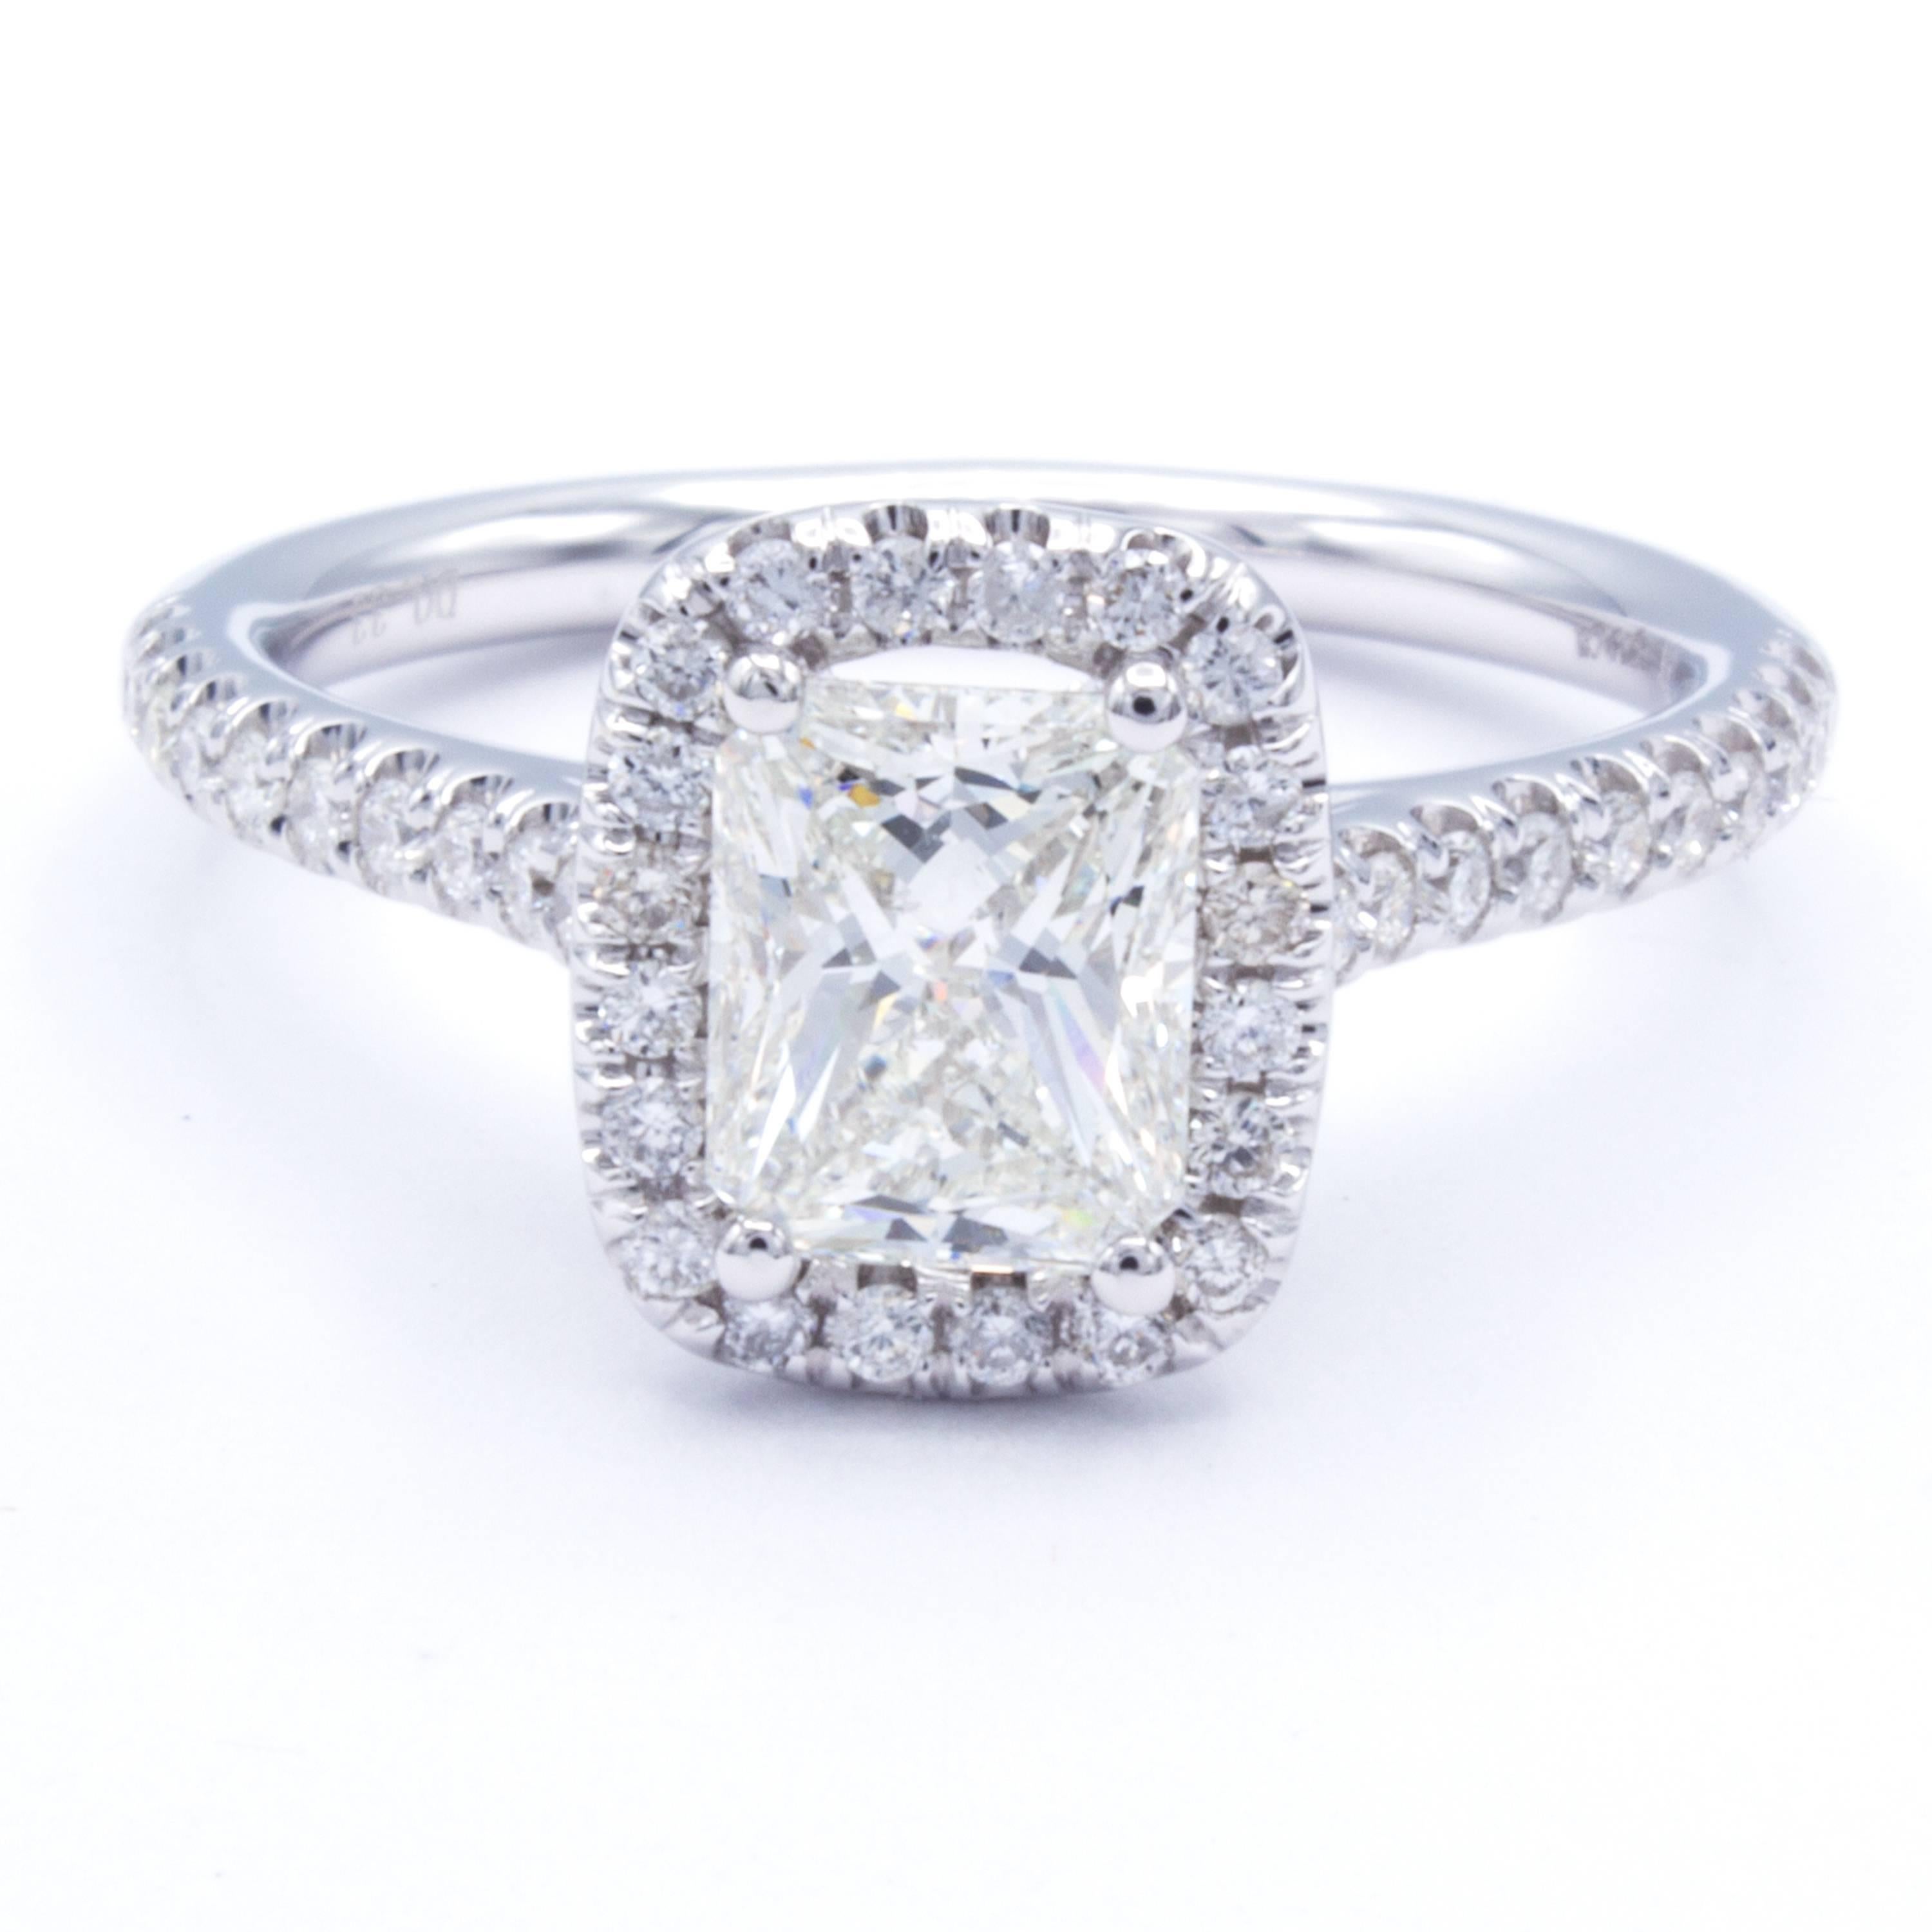 A delicate setting of 18Kt white gold carries a beautiful GIA certified 1.02 carat radiant cut diamond in this Rosenberg Diamonds & Co. diamond engagement ring. Glittering pave set round brilliant diamond accents travel around the center stone to